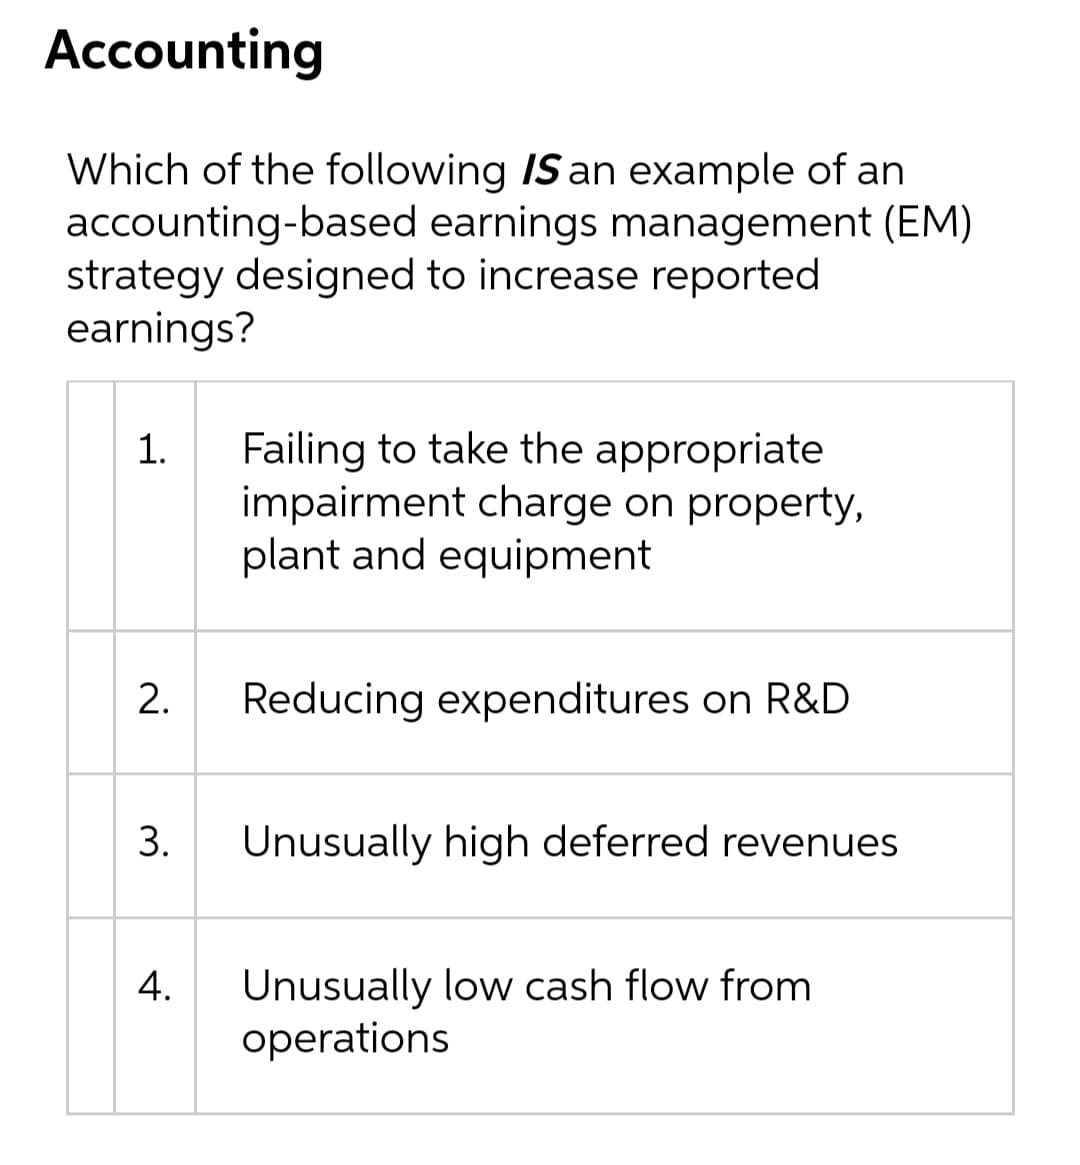 Accounting
Which of the following IS an example of an
accounting-based earnings management (EM)
strategy designed to increase reported
earnings?
Failing to take the appropriate
impairment charge on property,
plant and equipment
1.
Reducing expenditures on R&D
Unusually high deferred revenues
Unusually low cash flow from
operations
2.
3.
4.
